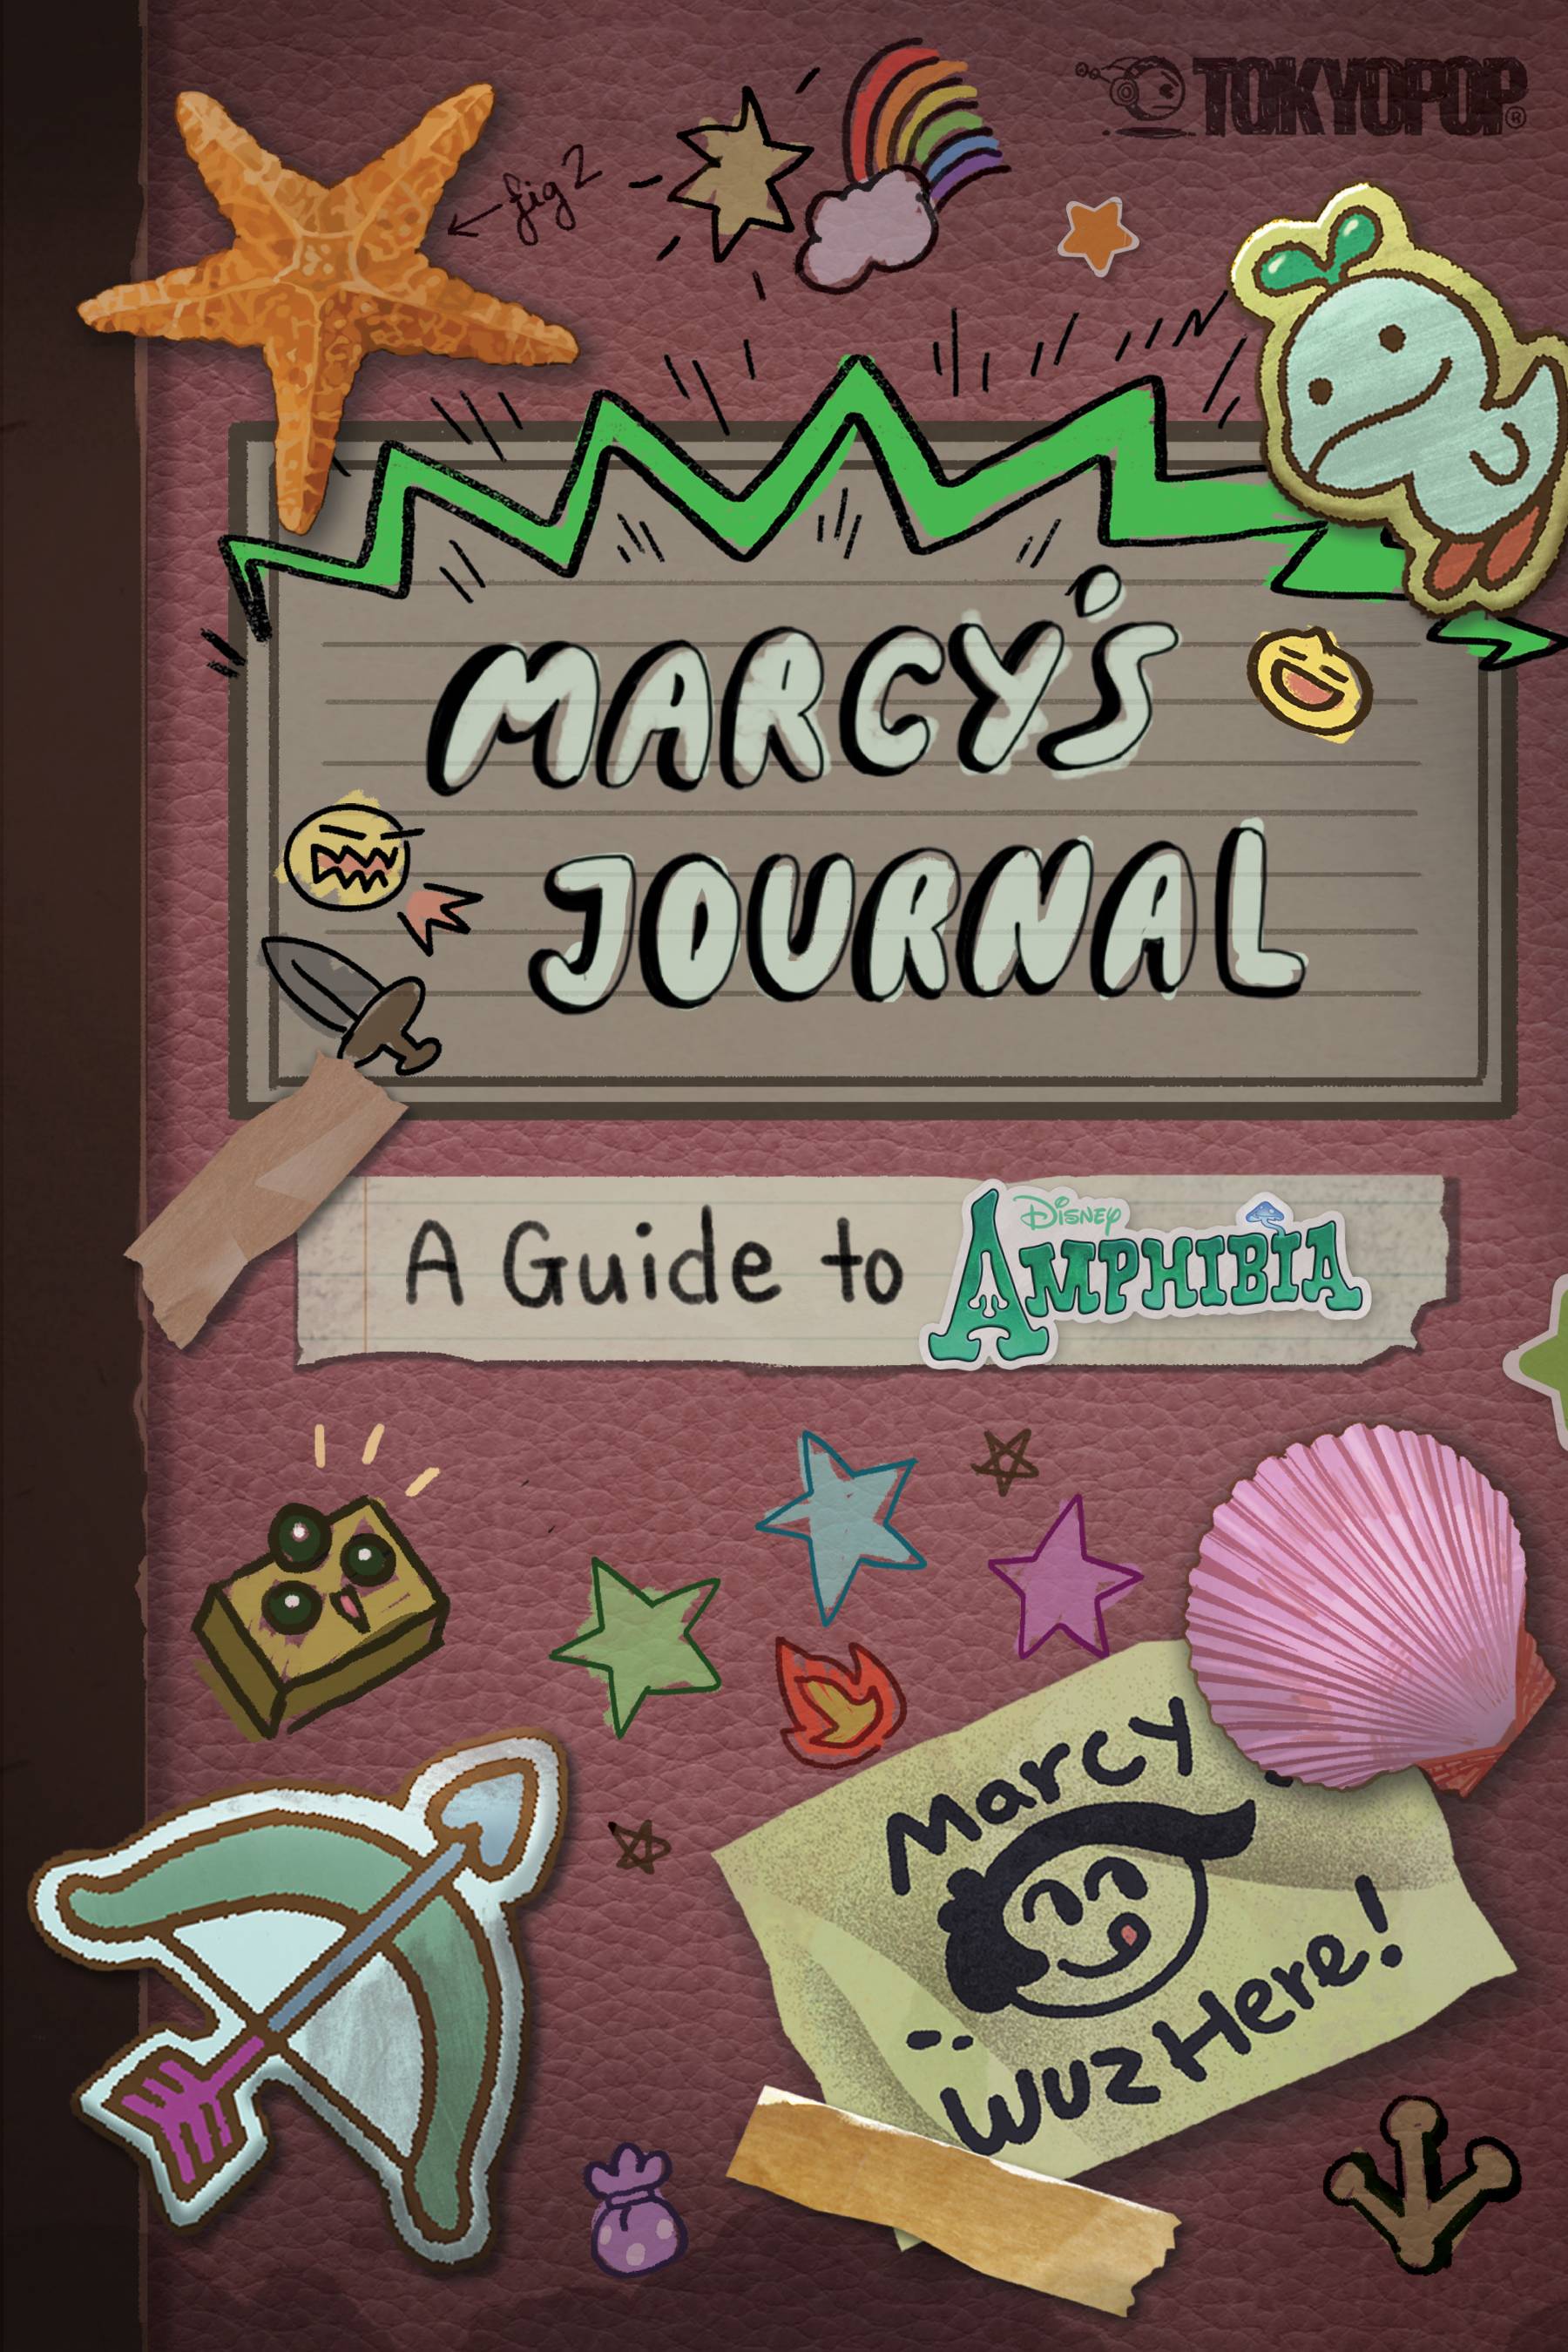 MARCYS JOURNAL A GUIDE TO AMPHIBIA TP